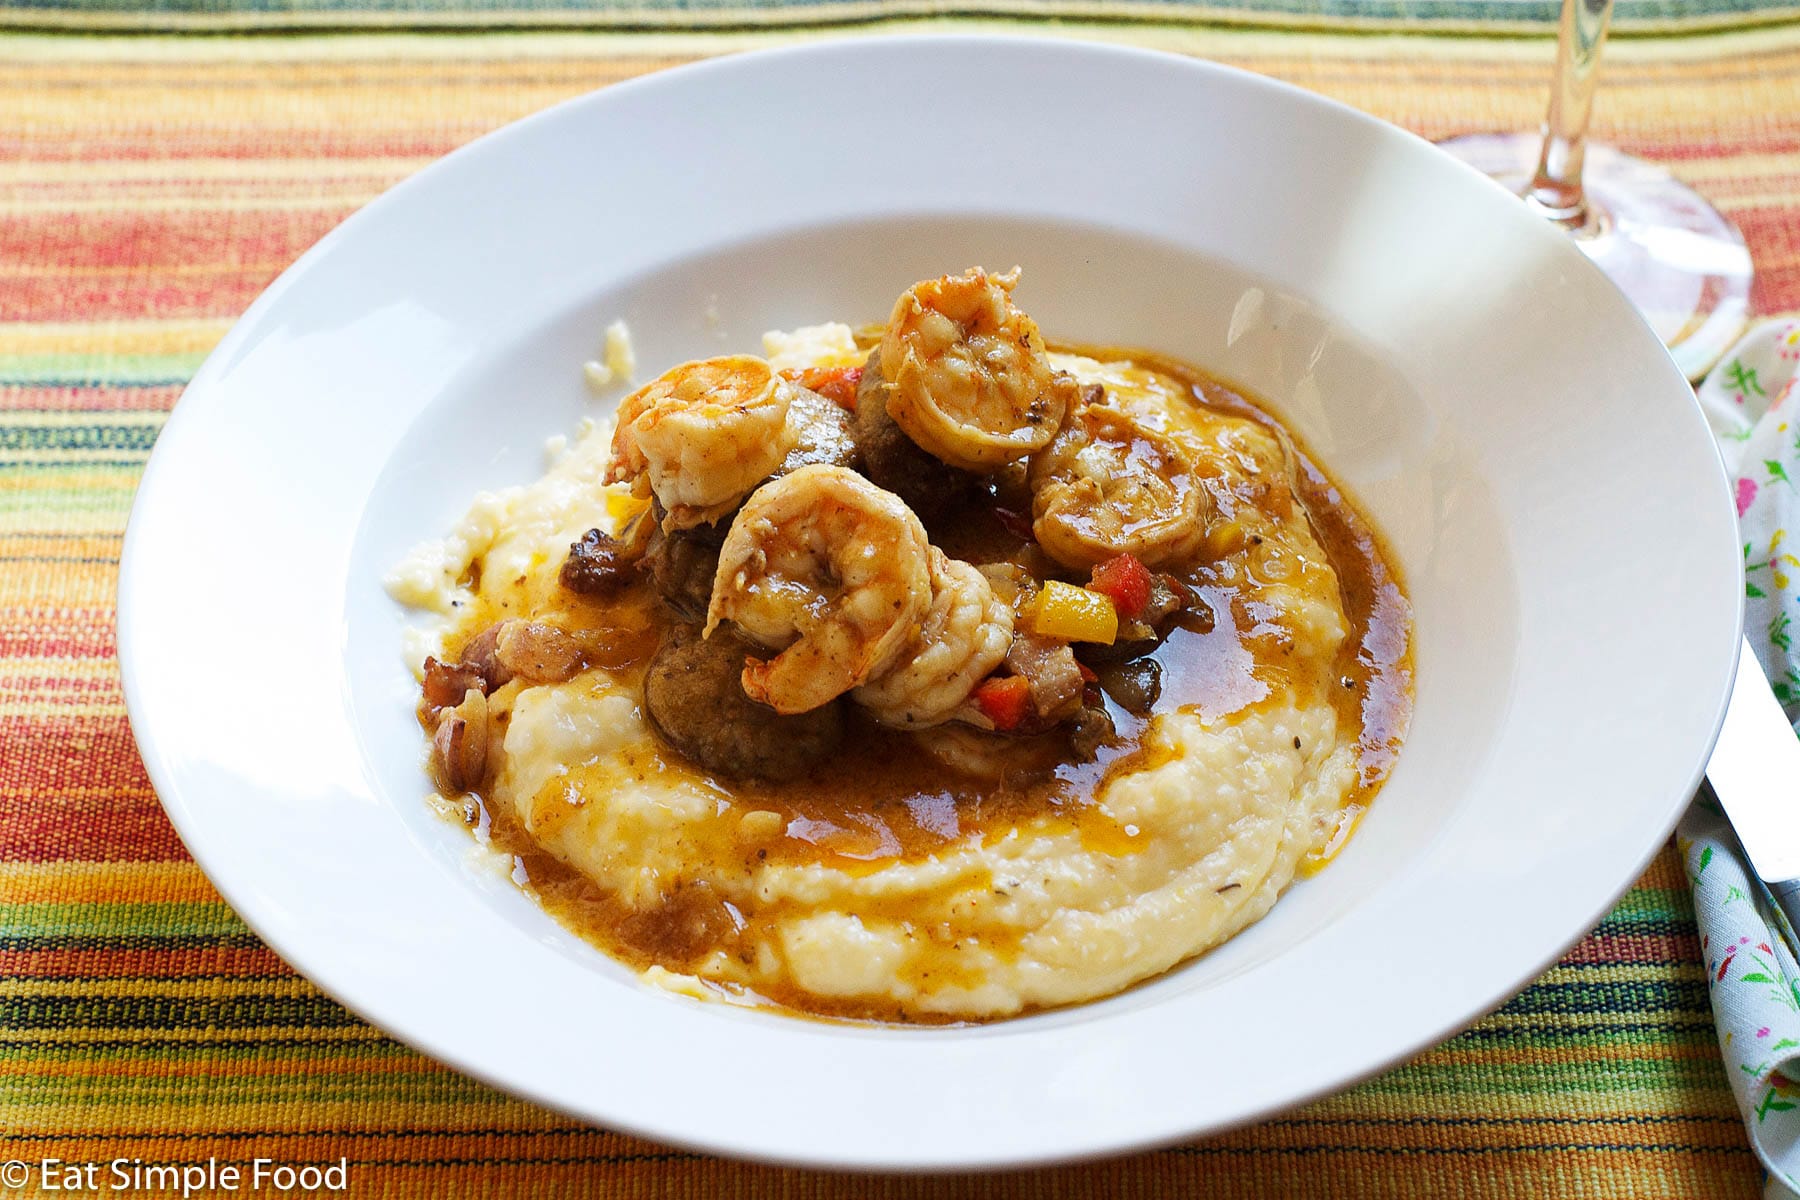 Shrimp In A Dark Roux With red and yellow peppers on yellow grits on a white plate.